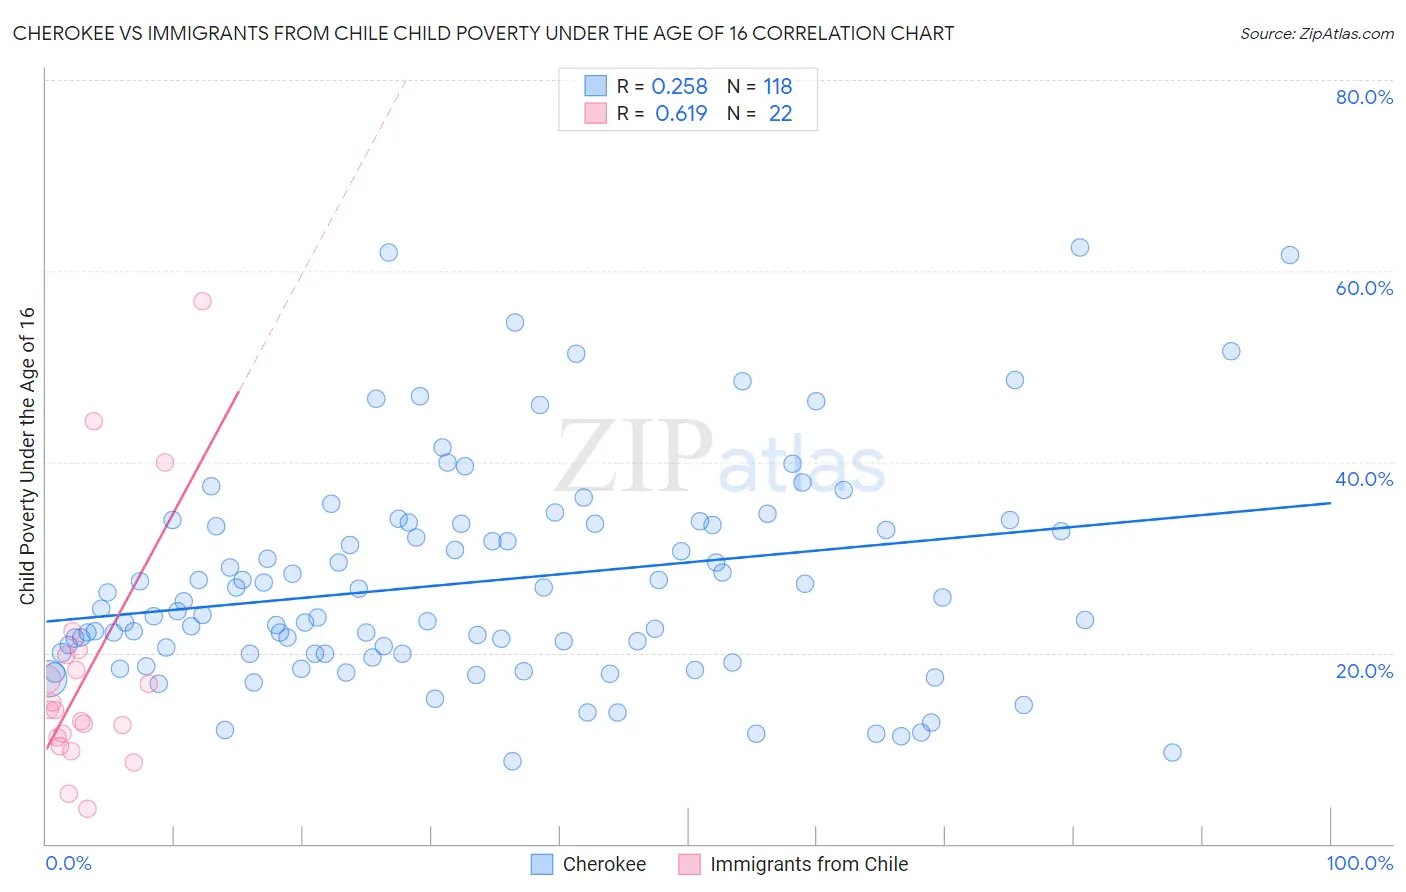 Cherokee vs Immigrants from Chile Child Poverty Under the Age of 16